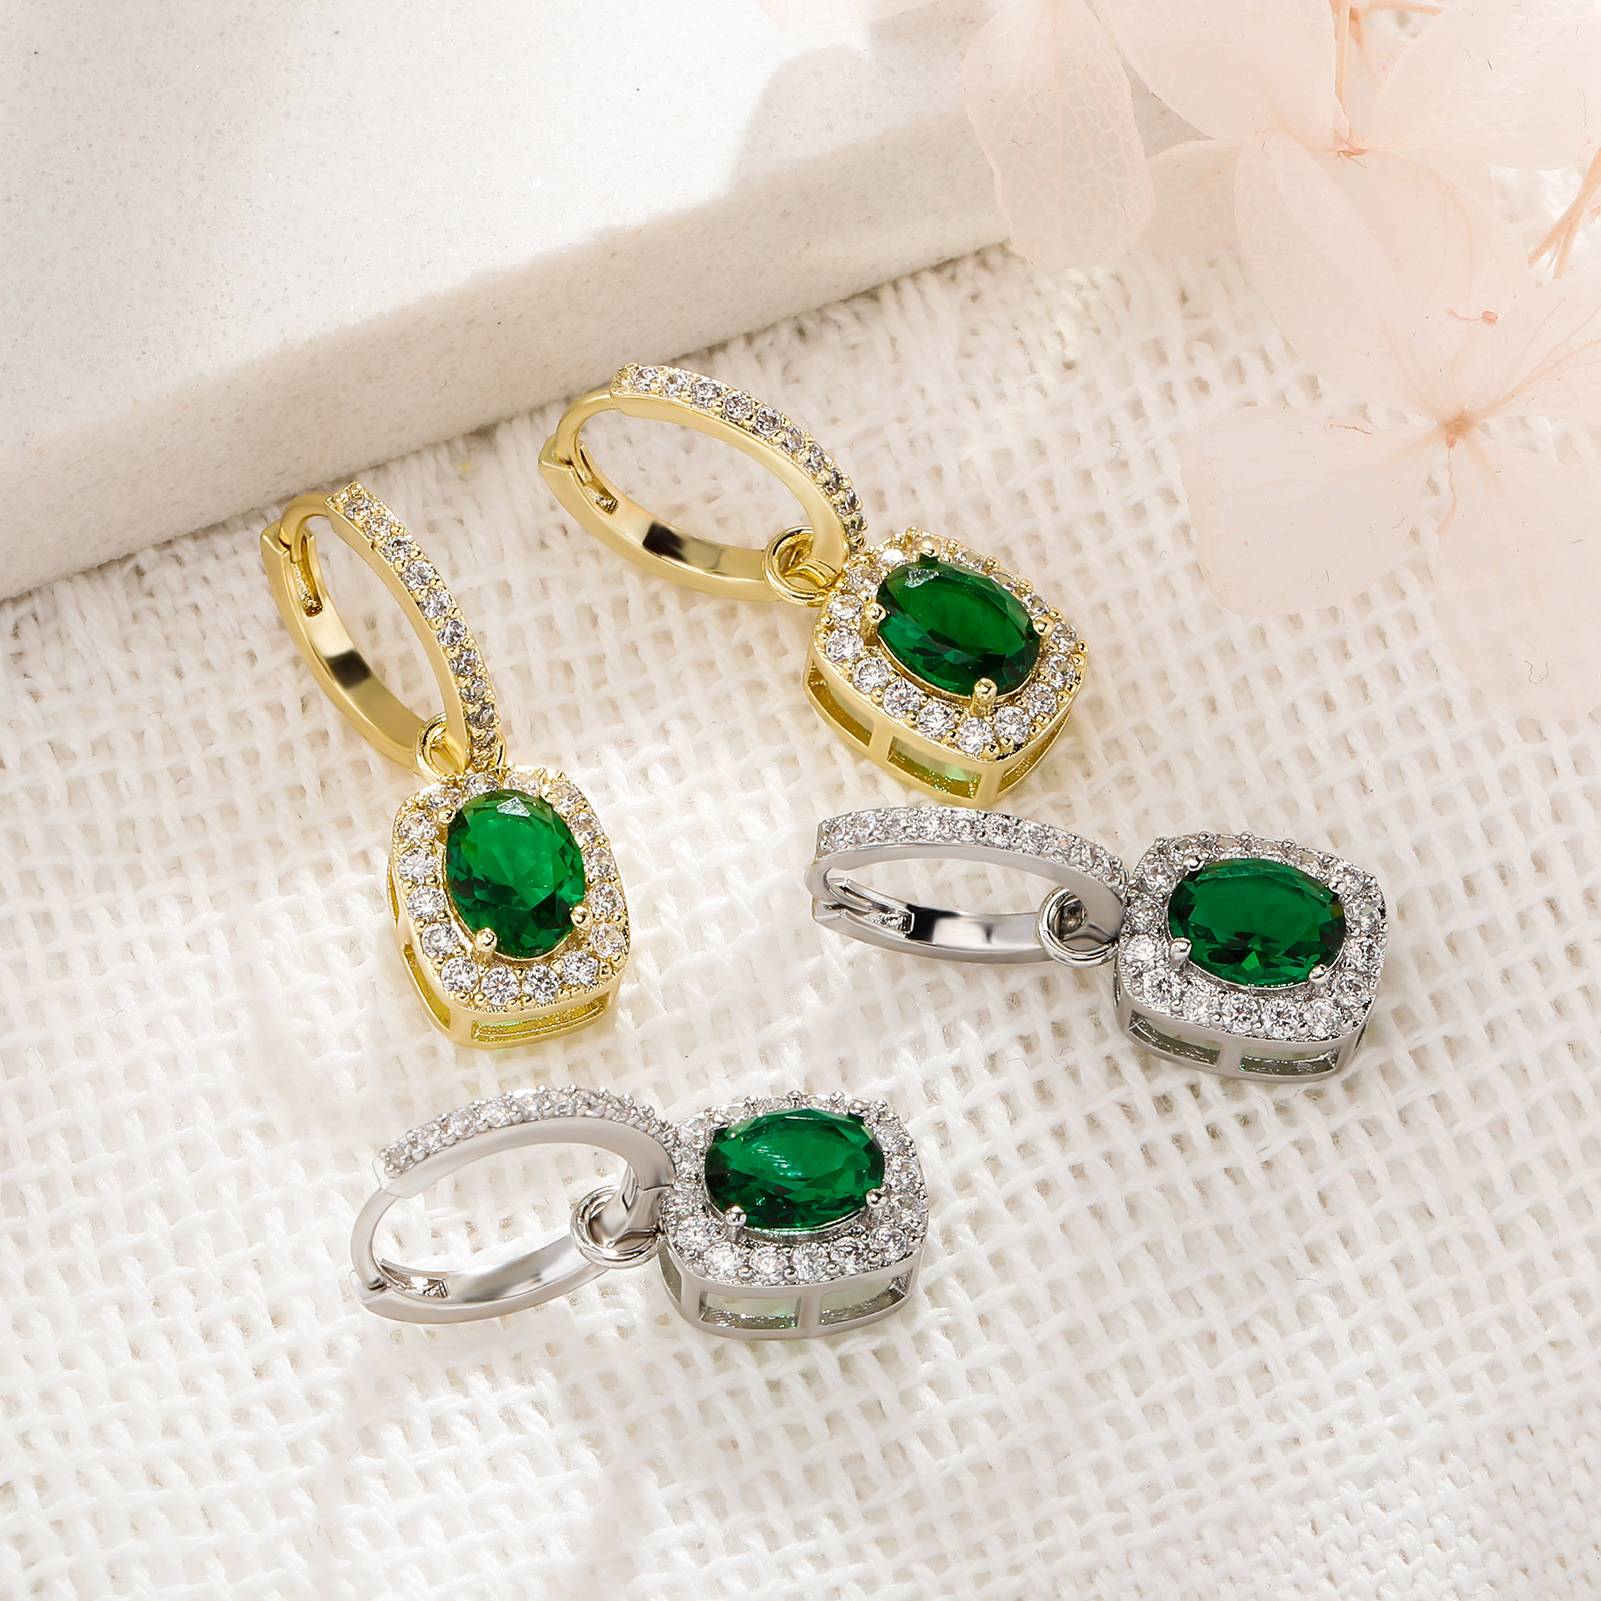  Trendy Gold Plated Micro Paved Crystal Drop Earrings Luxury Emerald Square Stone Drop Earrings For Ladies